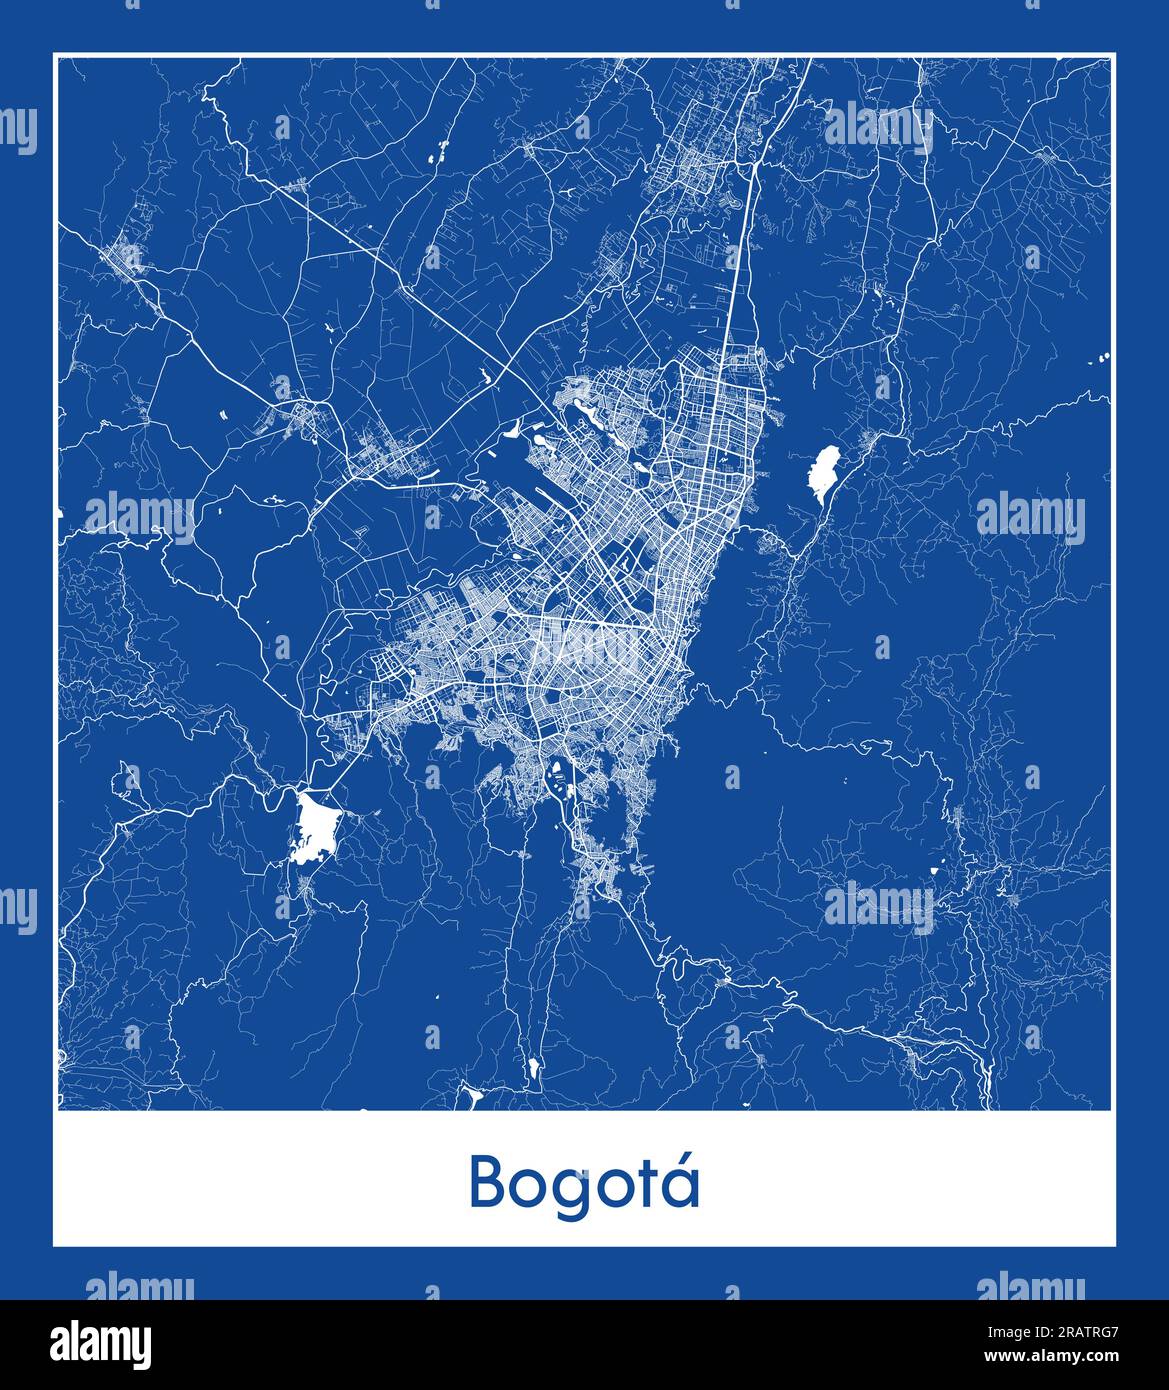 Bogota Colombia South America City map blue print vector illustration Stock Vector